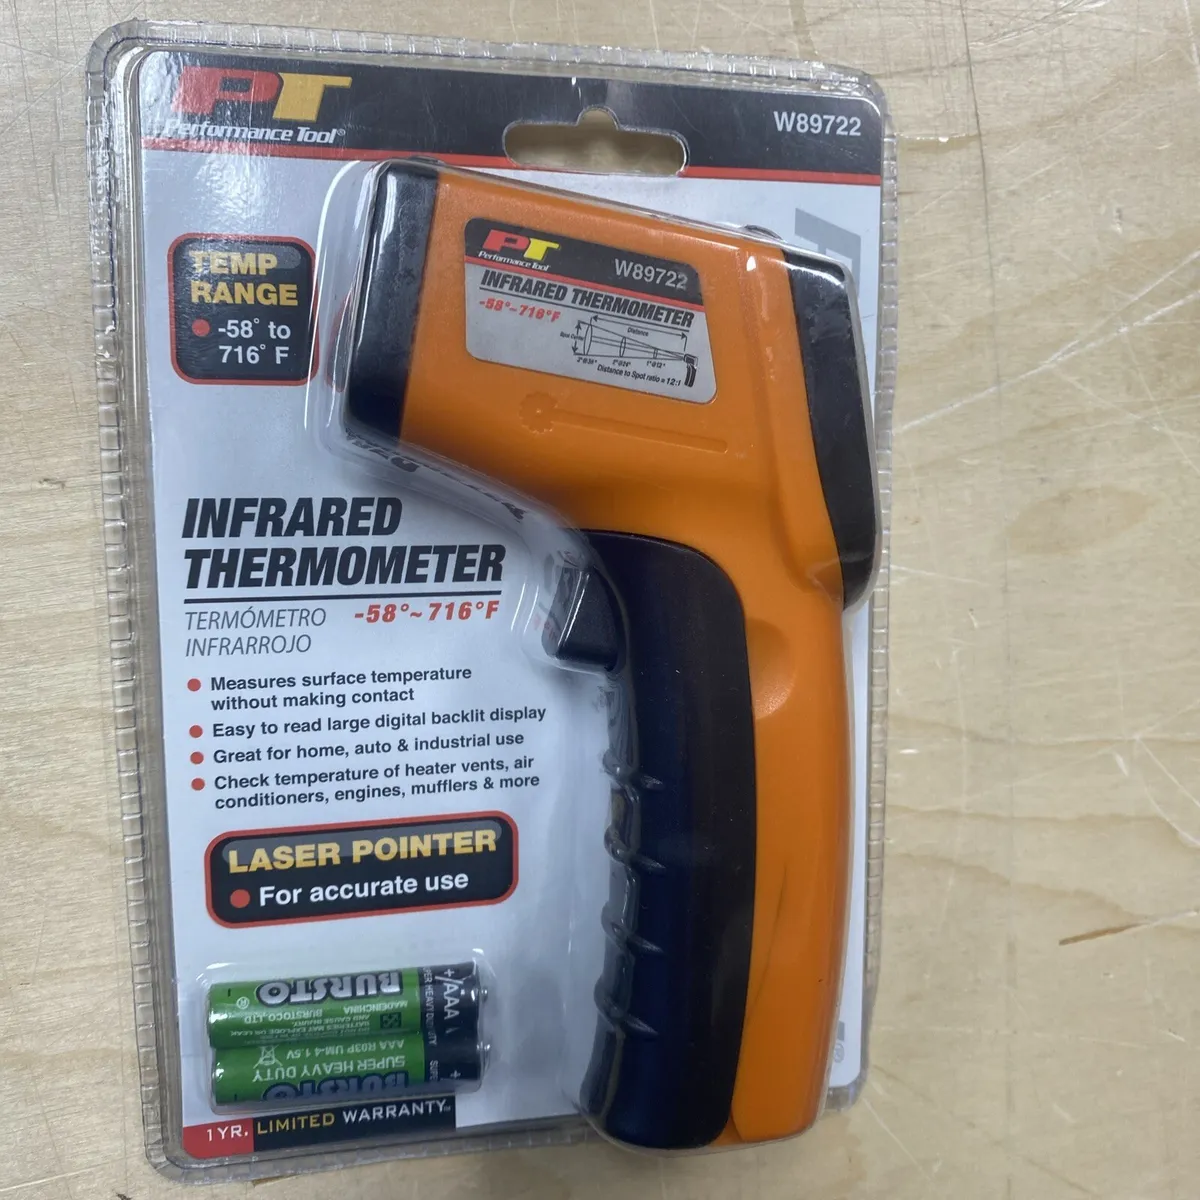 PT Performance Tool Infrared Thermometer W89722 V3 New (h)